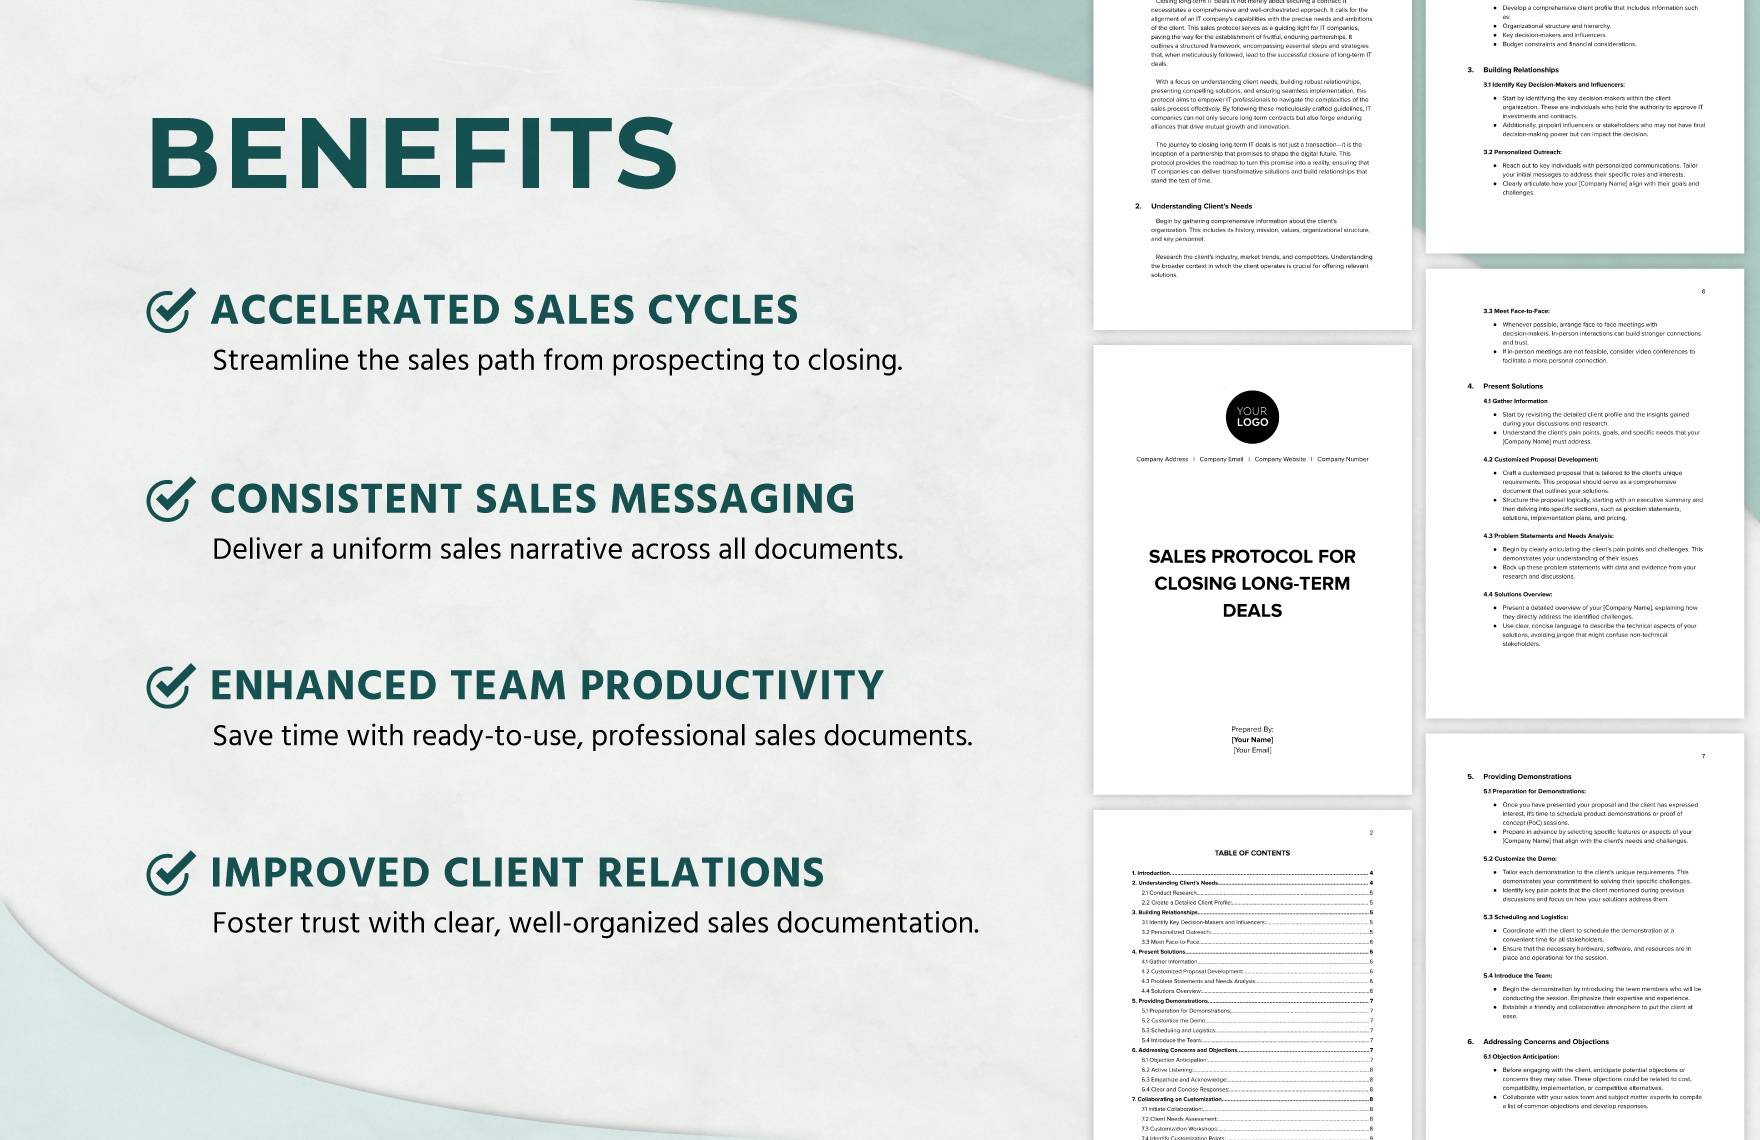 Sales Protocol for Closing Long-Term Deals Template